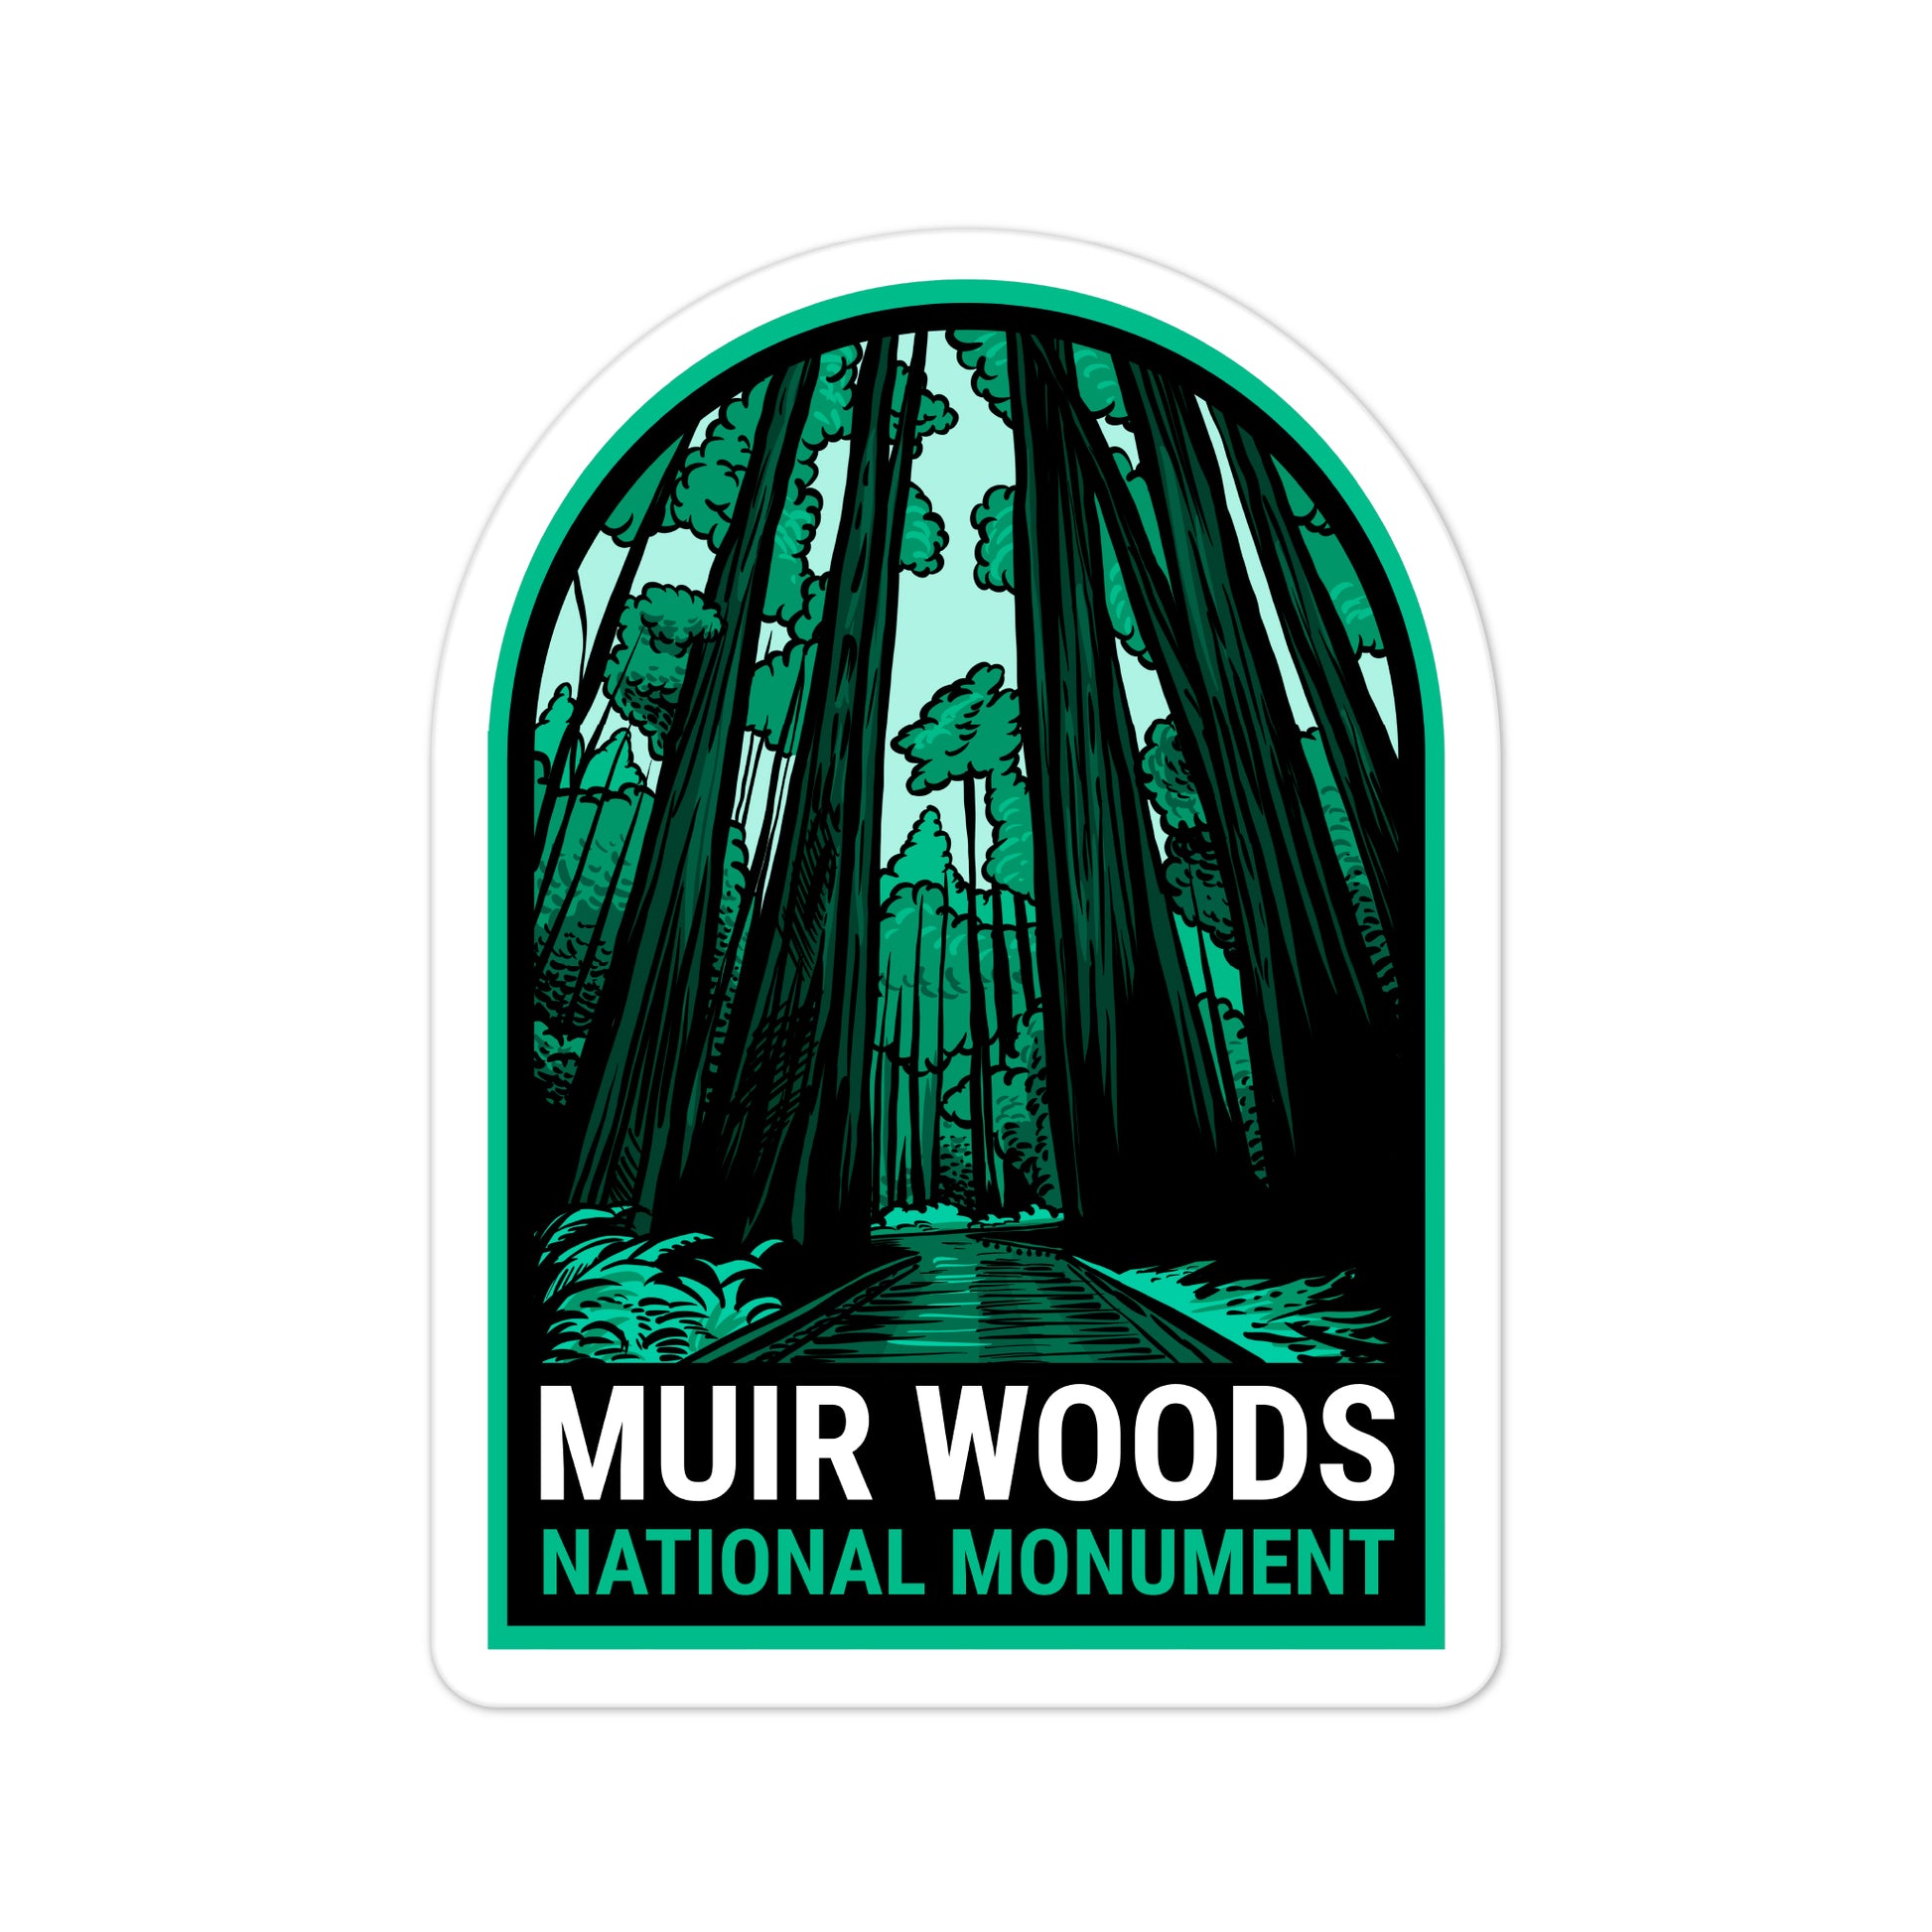 A sticker of Muir Woods National Monument